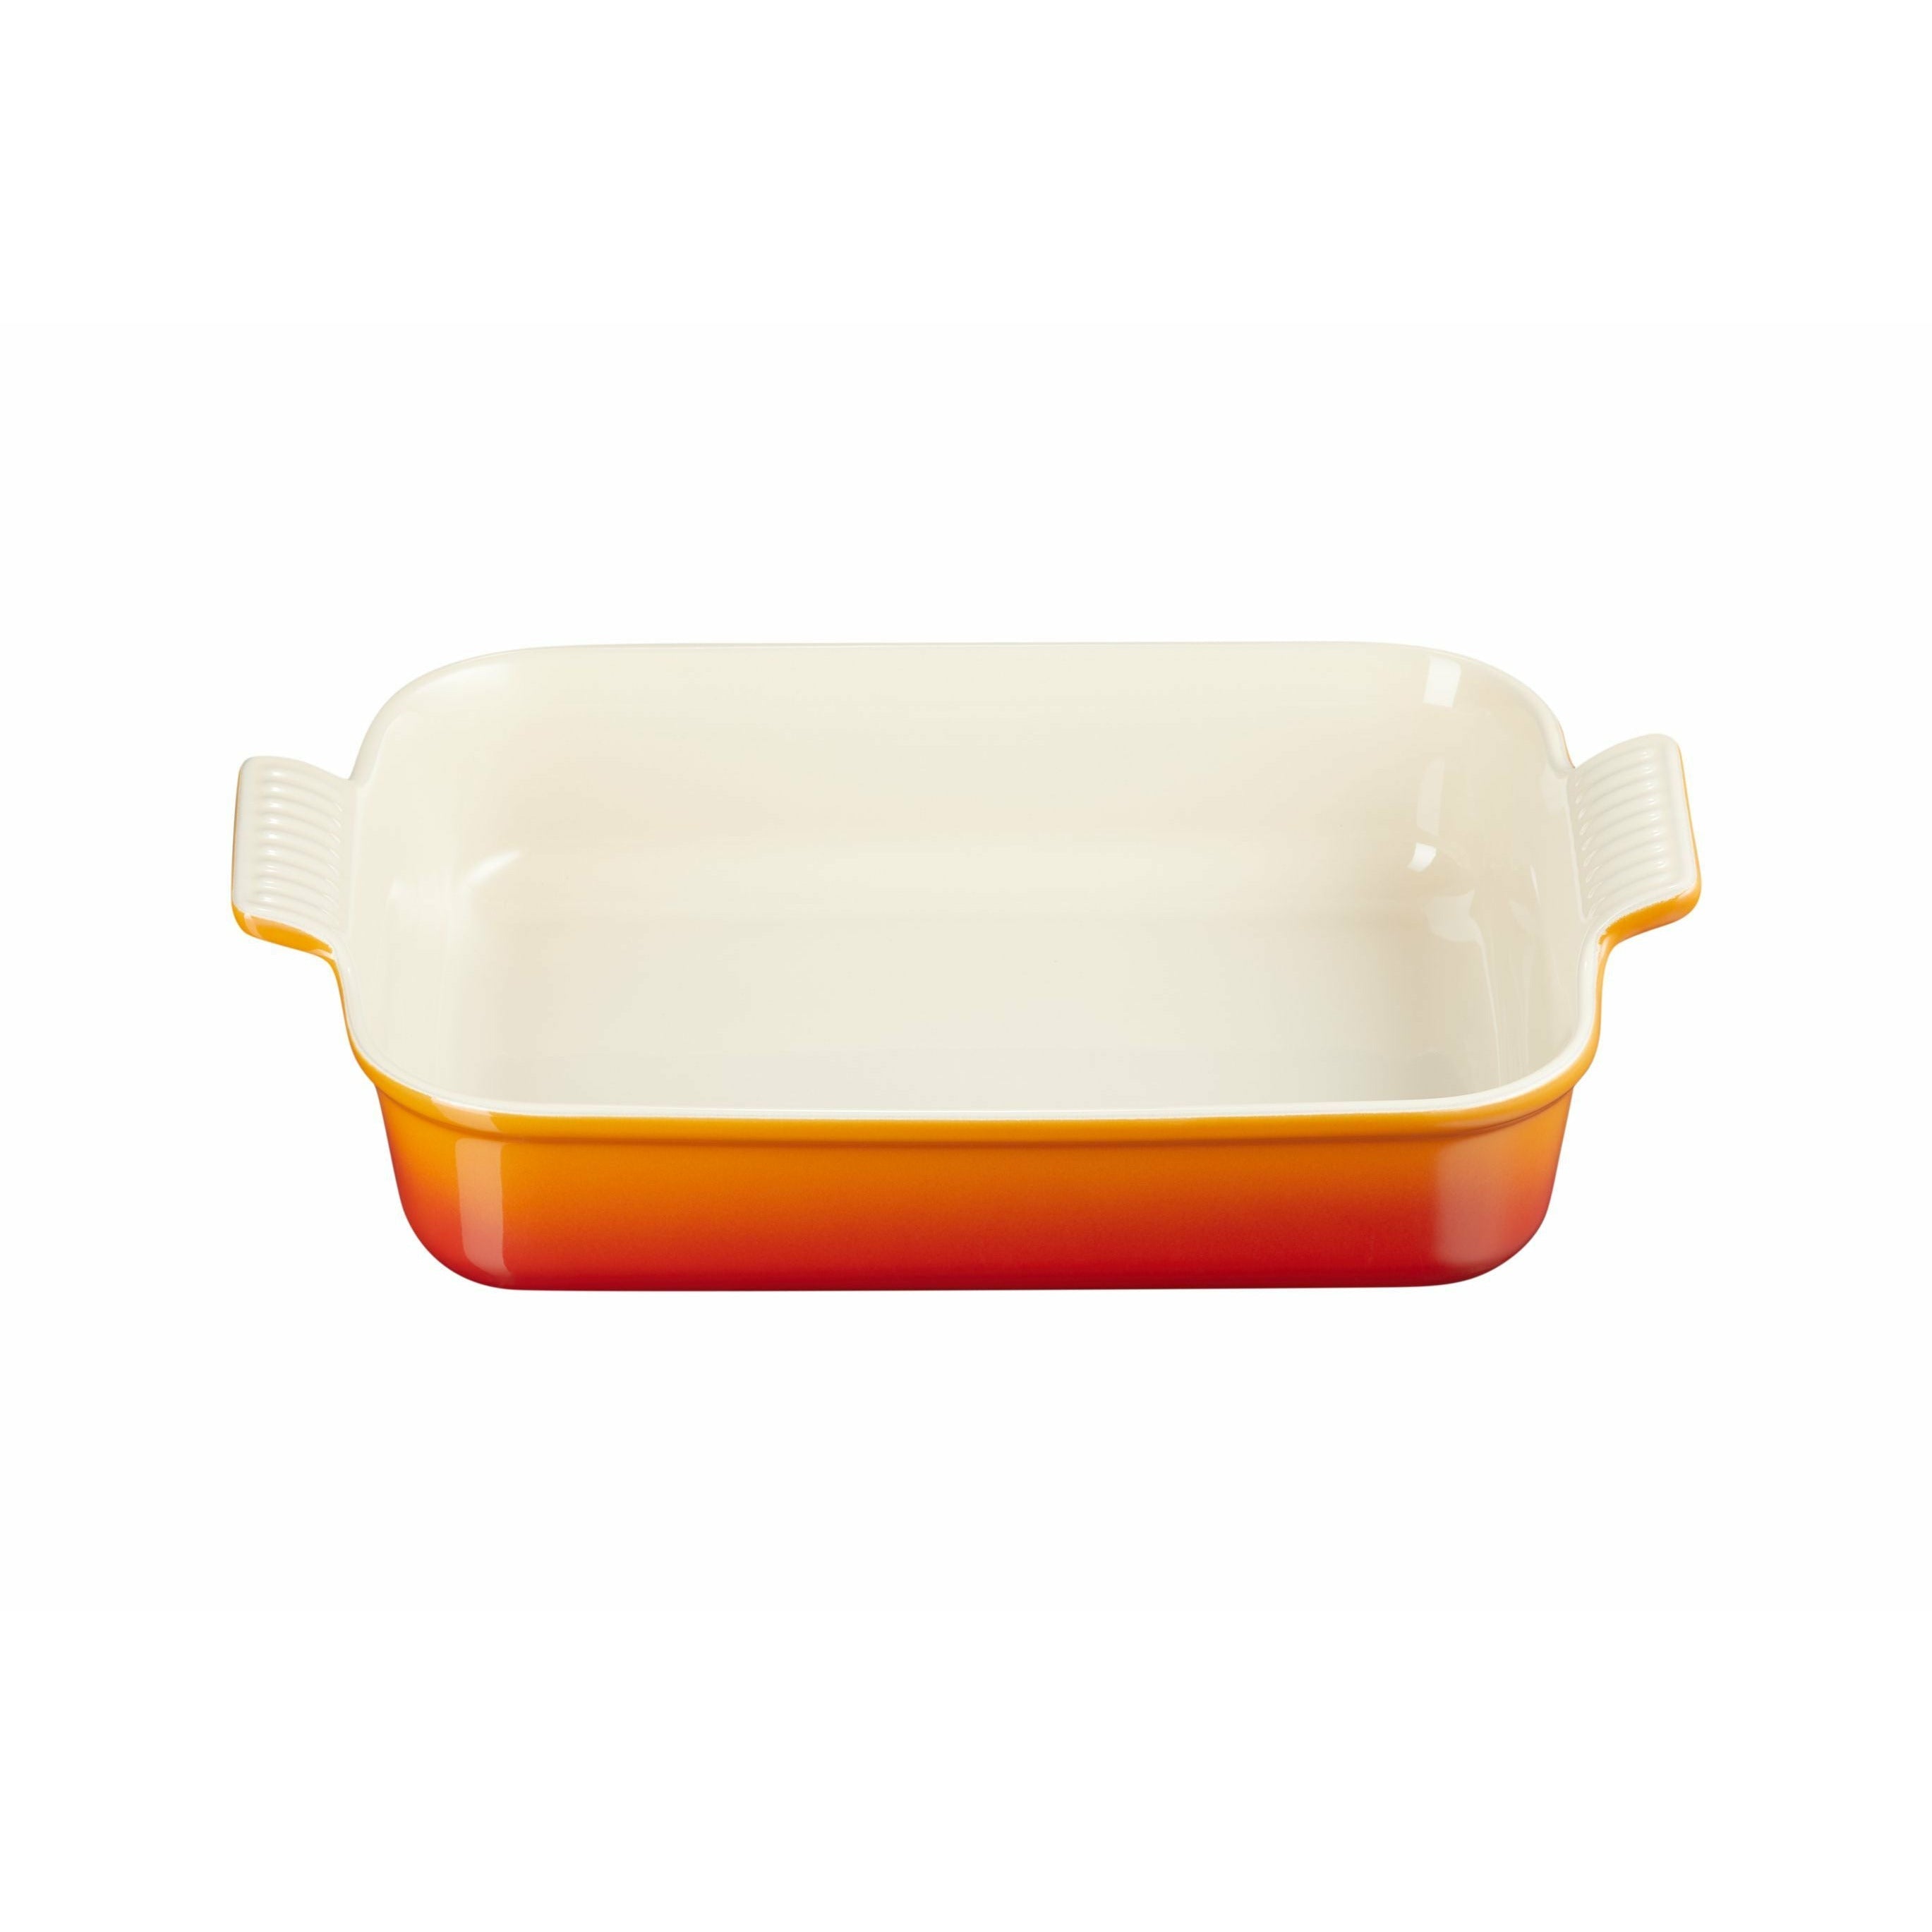 Le Creuset Rectangular Baking Dish Tradition 32 Cm, Oven Red